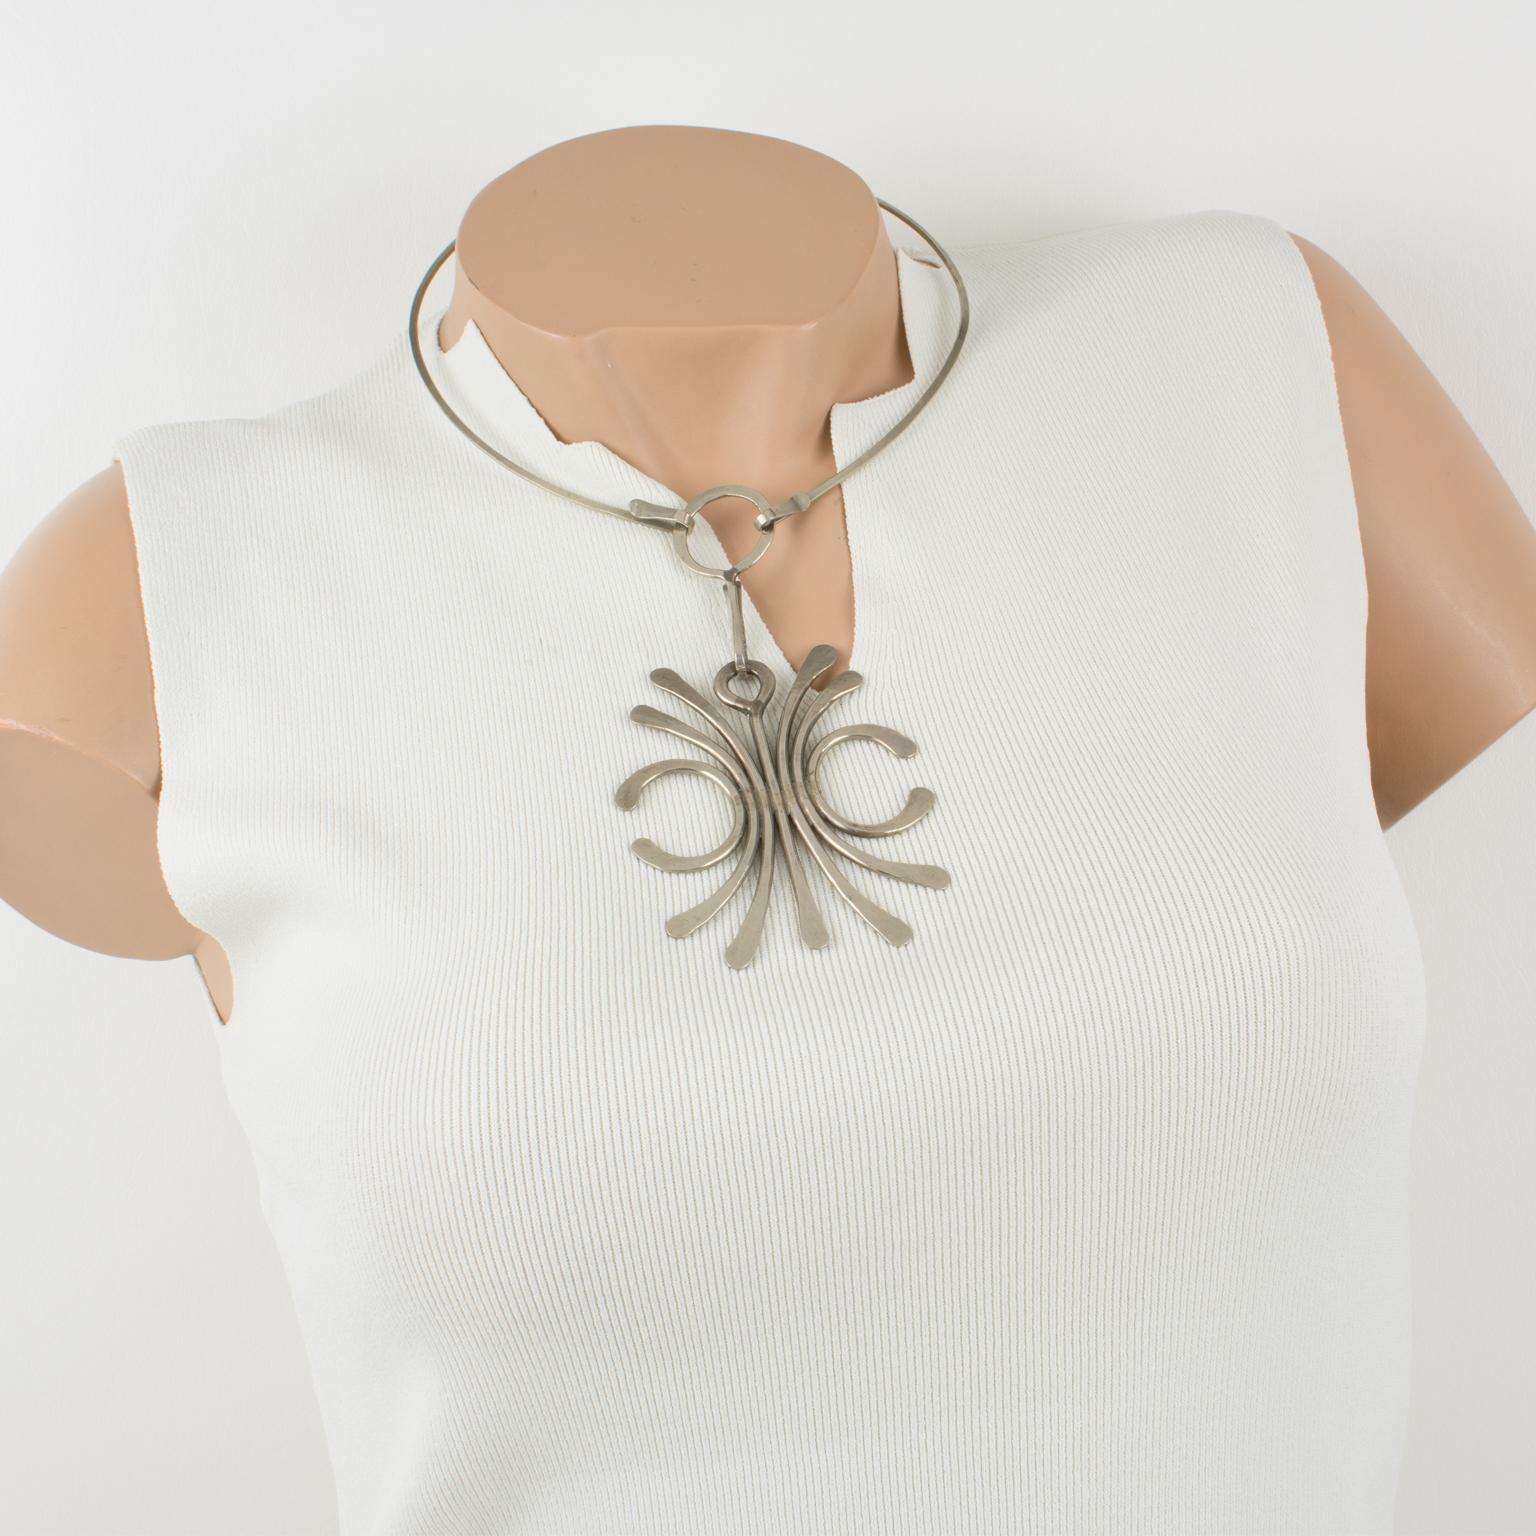 This spectacular Mid-Century Modern Space Age collar necklace has an extra-long pendant. The choker features a stainless steel rigid neckband, ornate with a massive geometric pendant, in stainless steel wire with a slightly hammered surface finish.